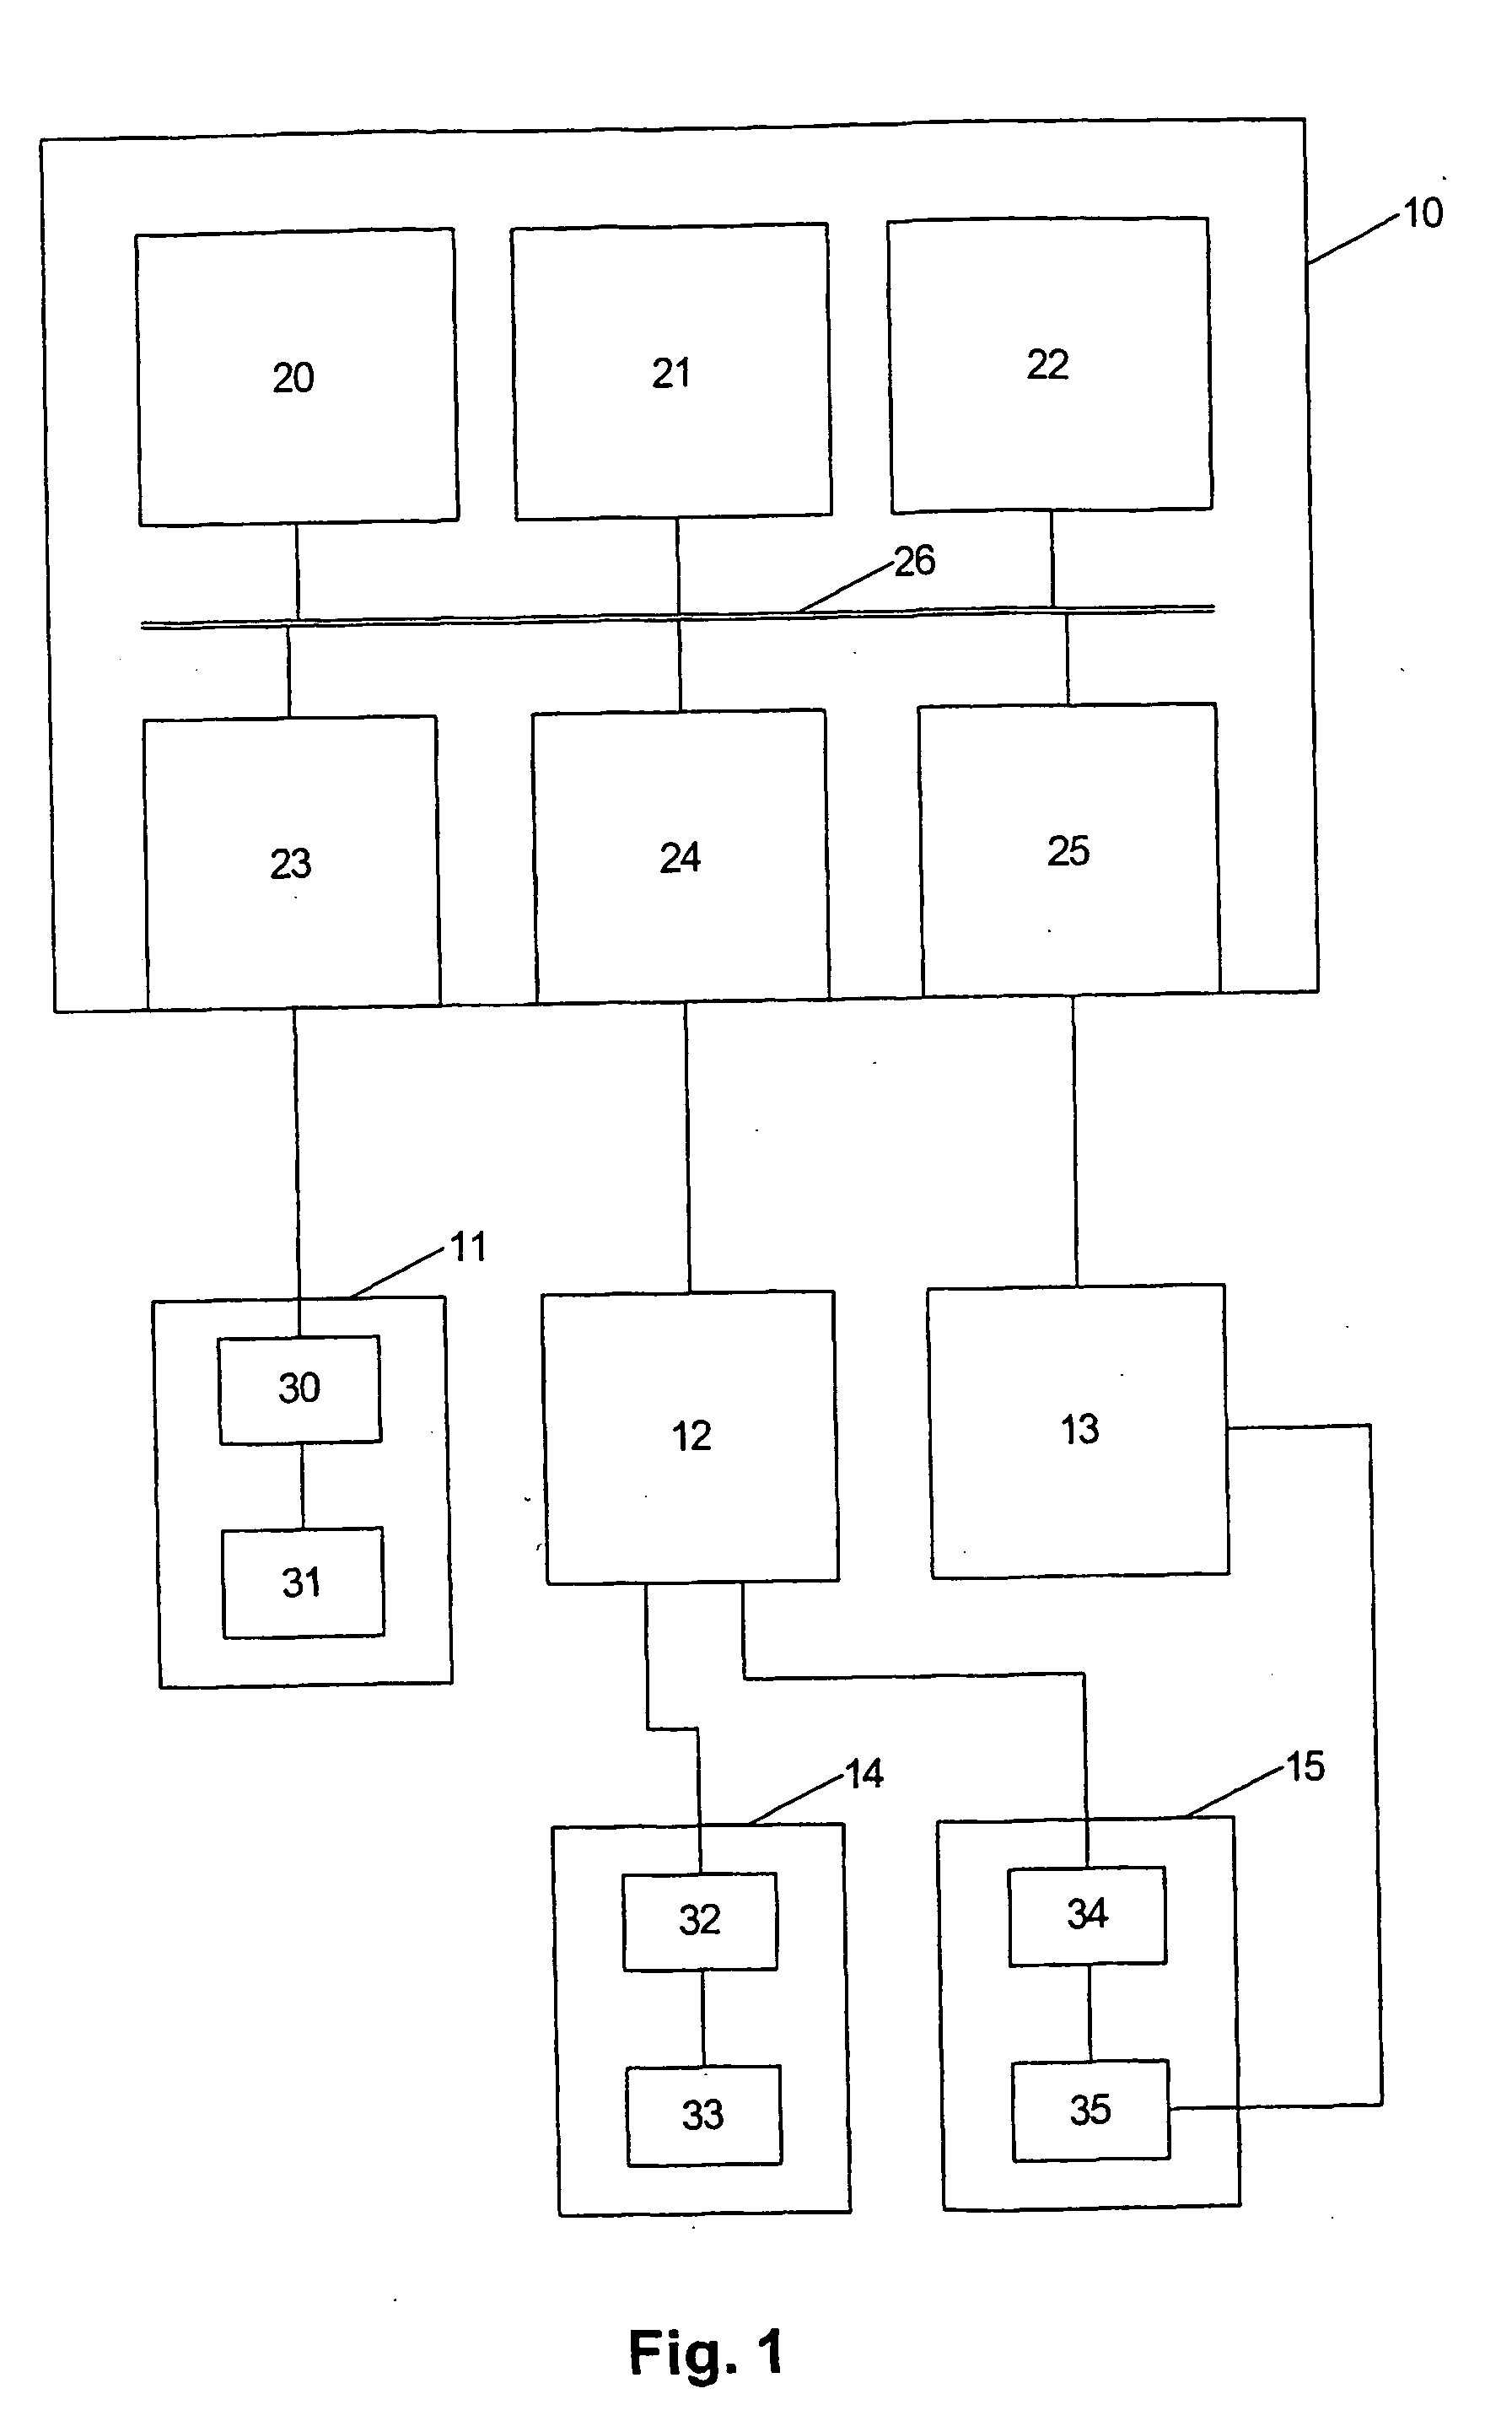 Method of cell therapy using fused cell hybrids